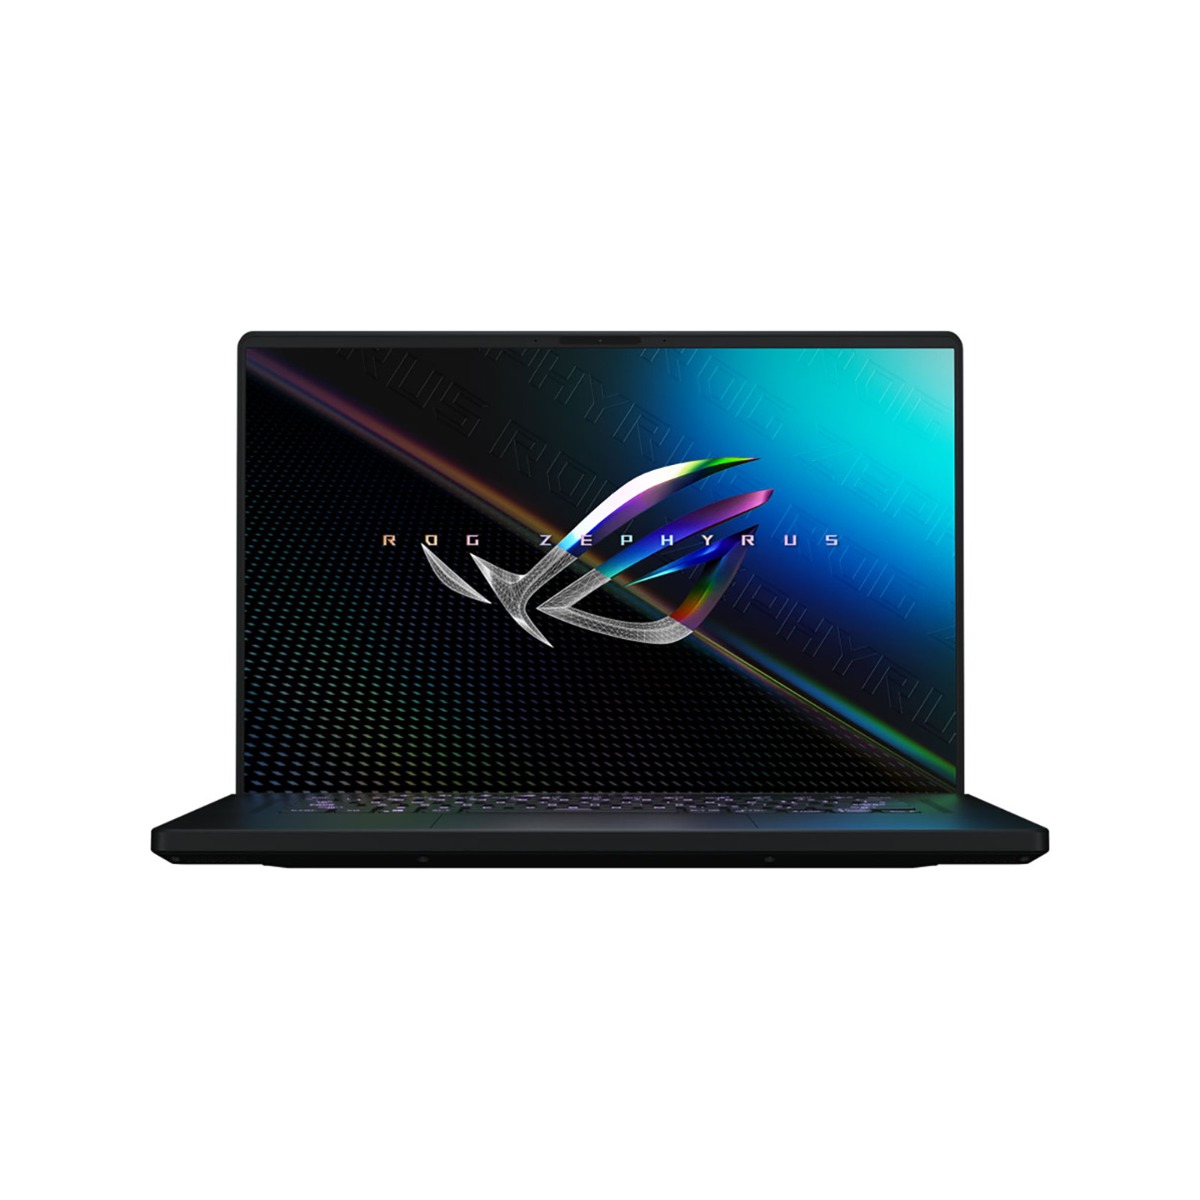 Asus-GU603ZE-I716512B0W-Asus-GU603ZE-I716512B0W-GU603ZE-I716512B0W-Laptops | LaptopSA.co.za a division of the notebook company 